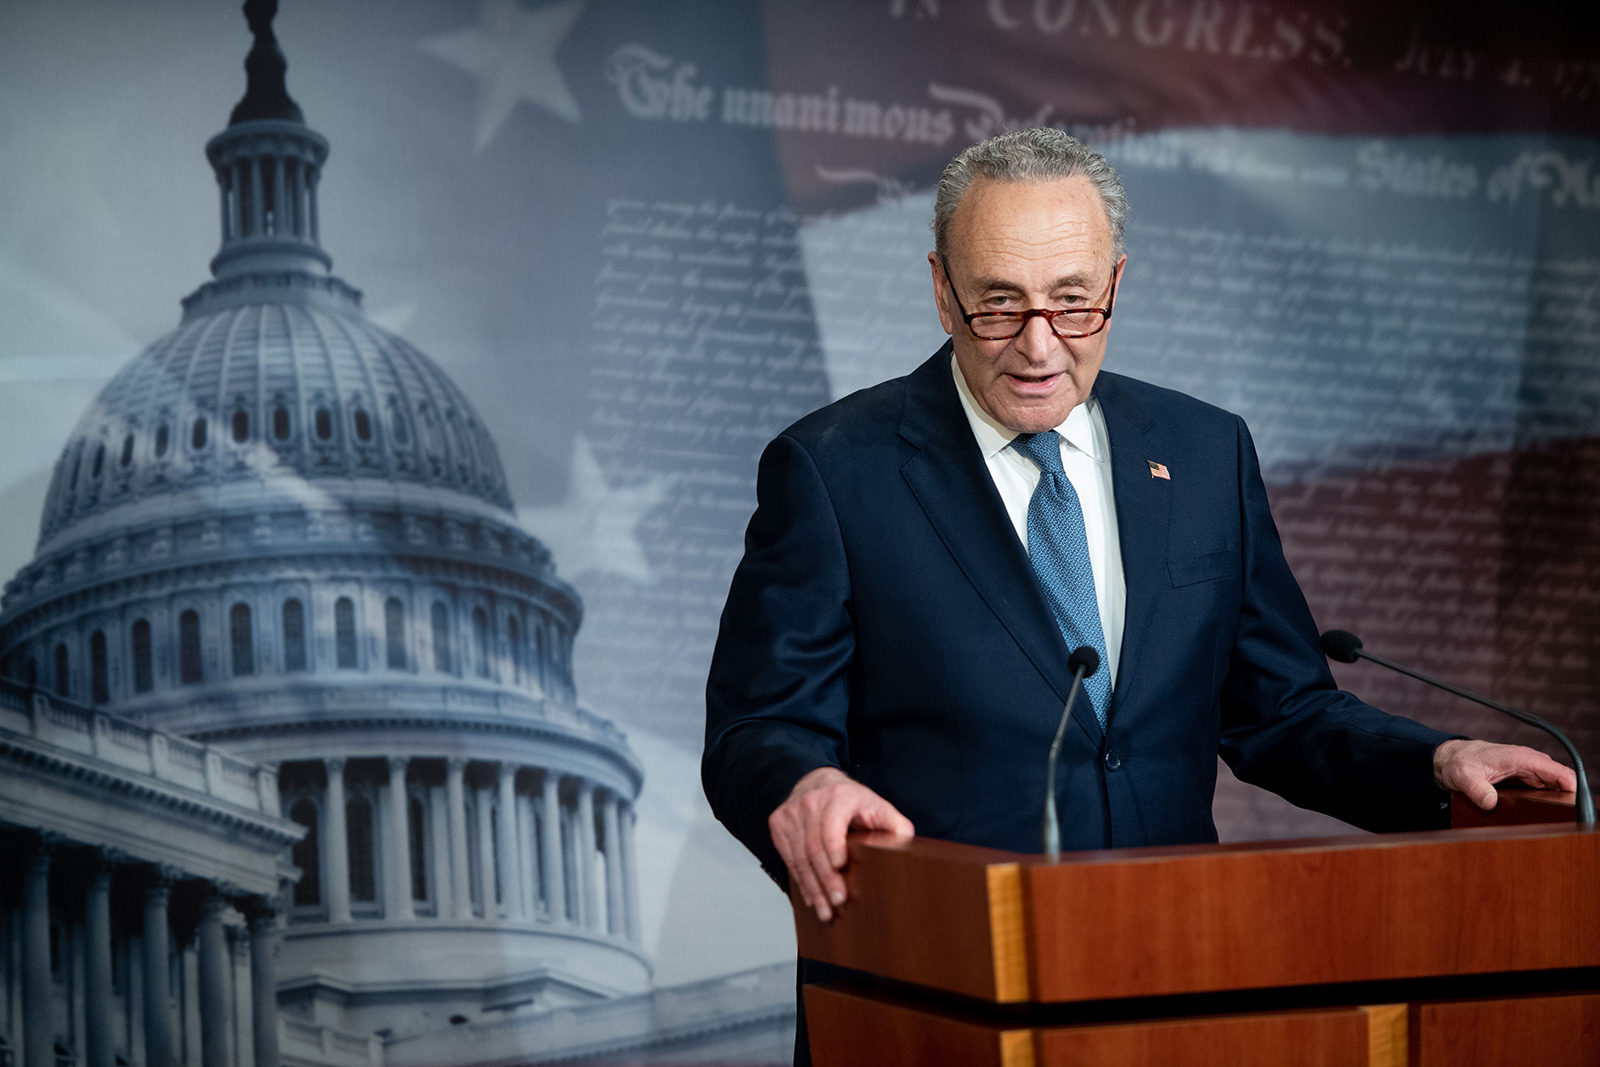 US Senate Minority Leader Chuck Schumer speaks during a press conference at the US Capitol in Washington, DC, April 21.